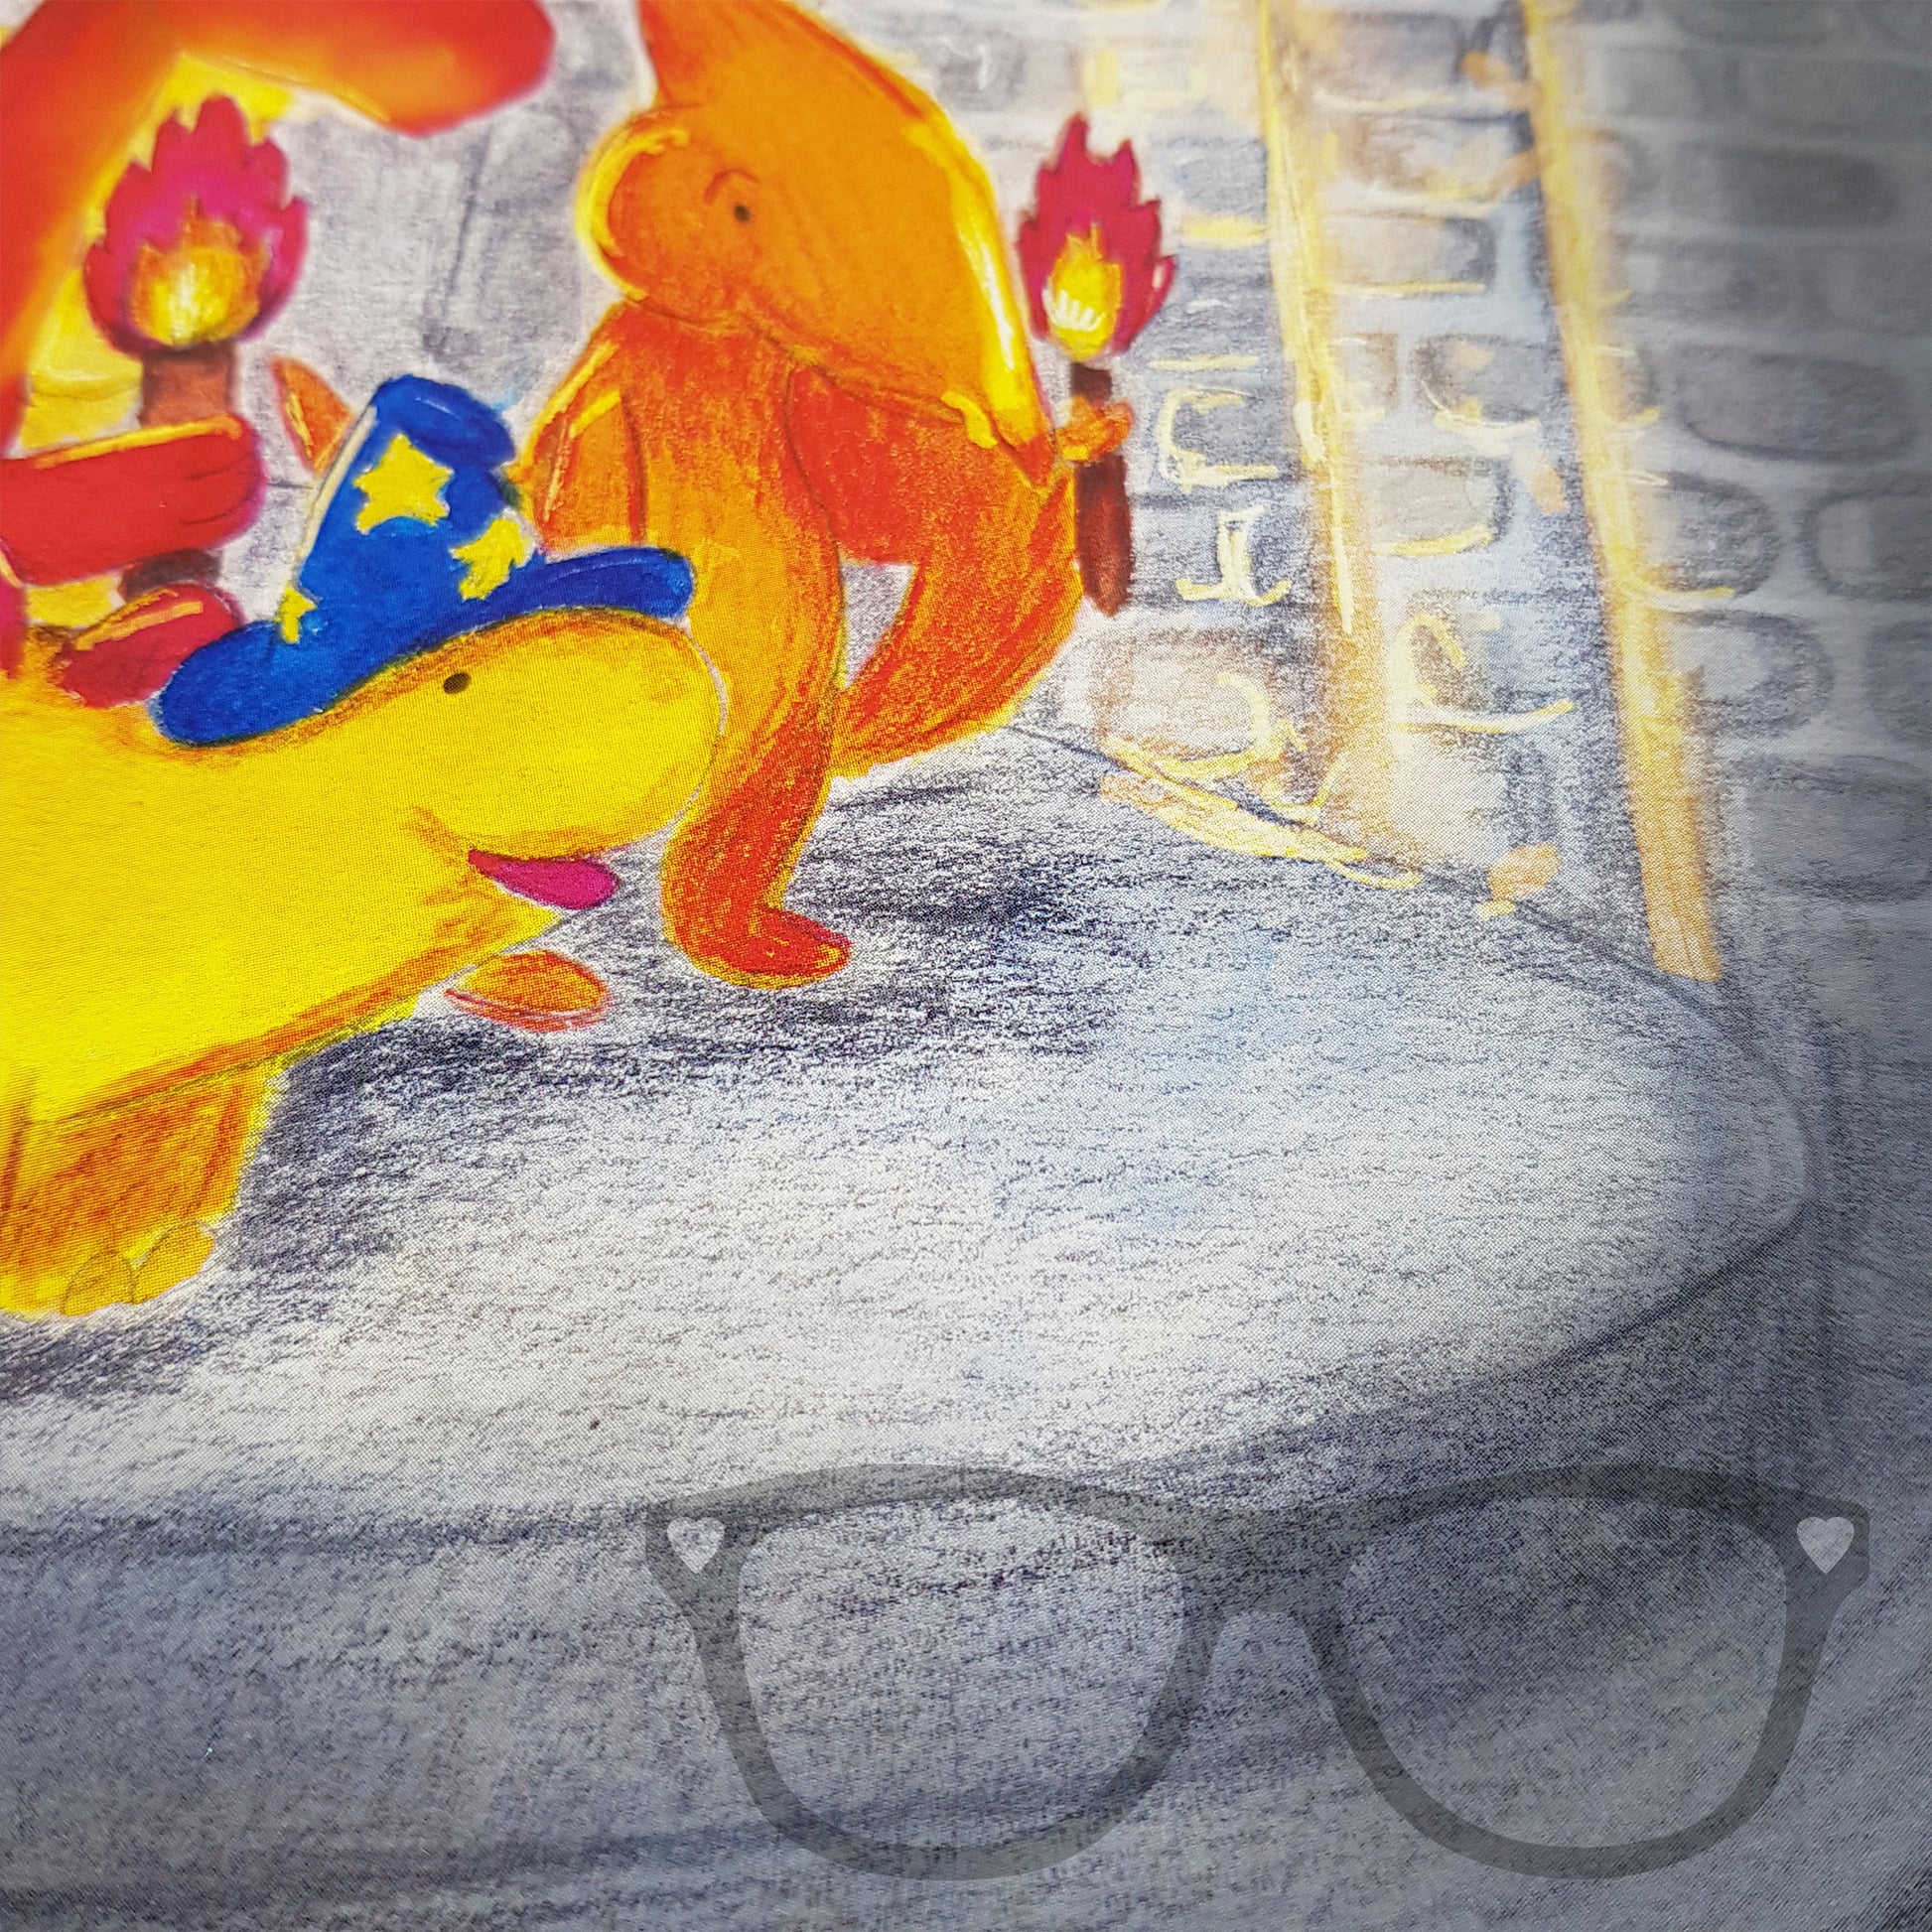 A close up to show the detail of the A4 Print "Lets go find the mystical donut" - Mini Geek Boutique